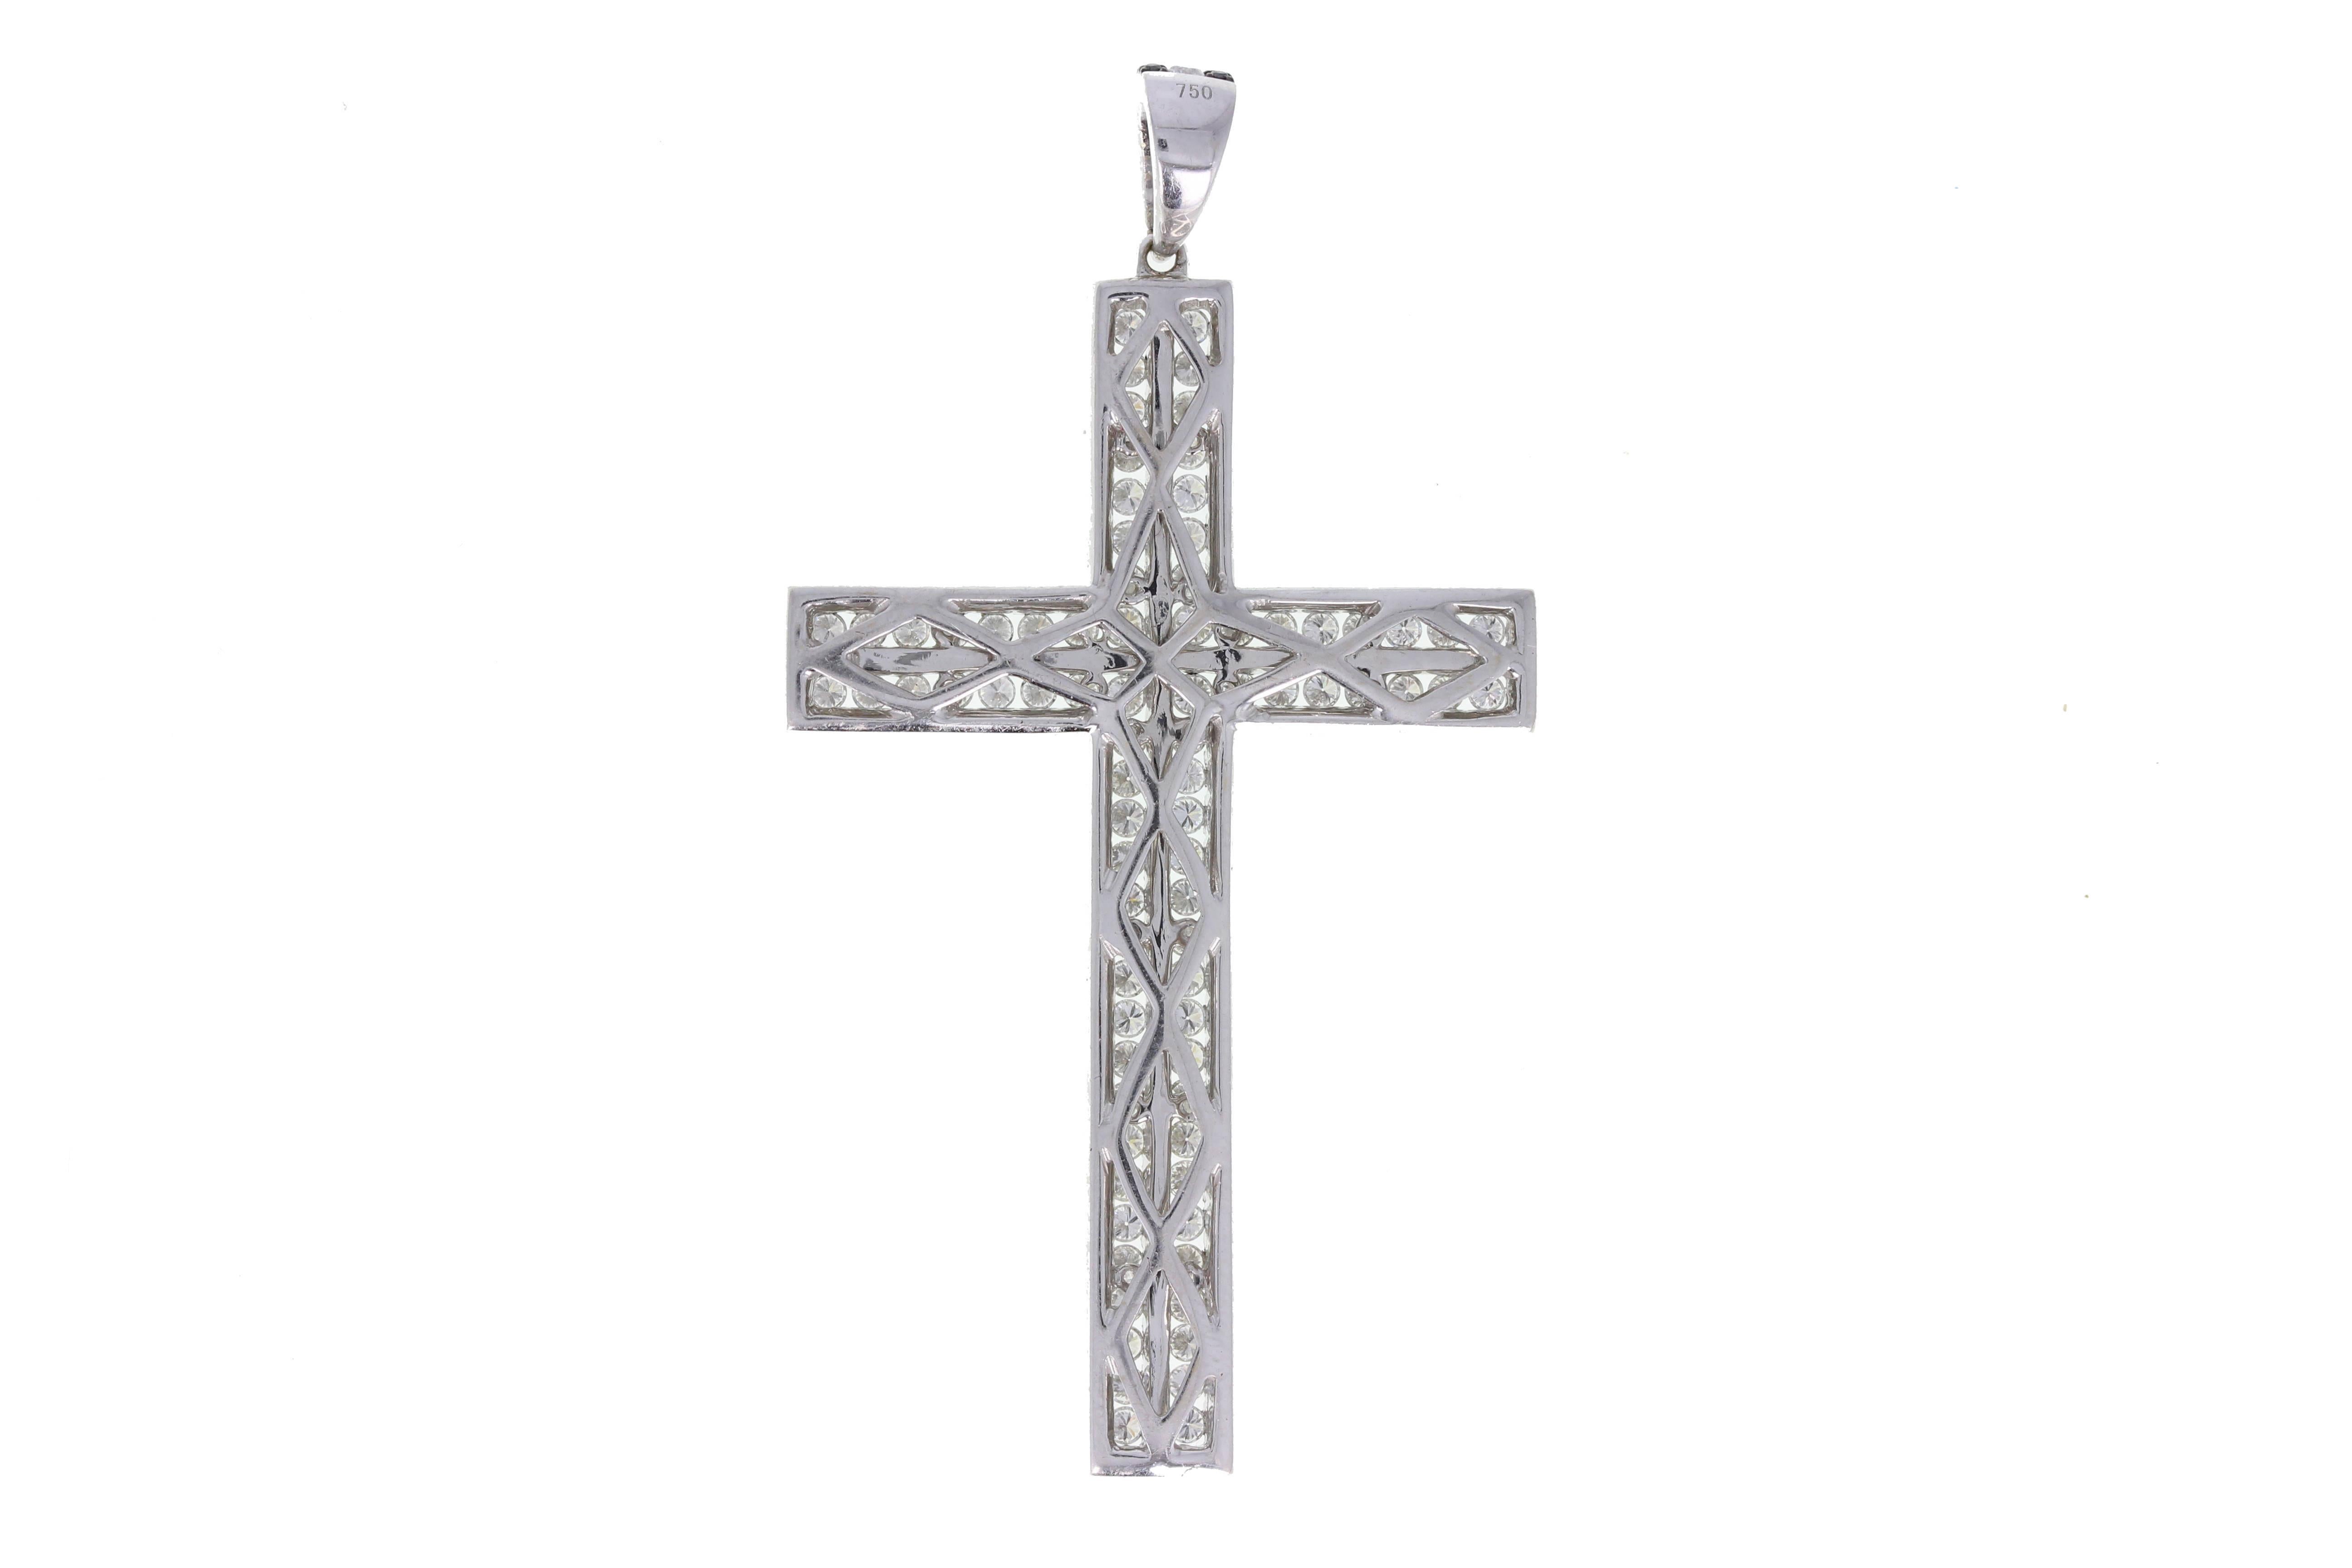 Large 18-carat white gold cross set with round, brilliant-cut white diamonds in double rows, surrounded with black diamonds. Large diamond set bale.
 
Setting
Tests as 18ct white gold

Diamond
Weight: 1.00ct
Clarity: SI
Colour: H
Black